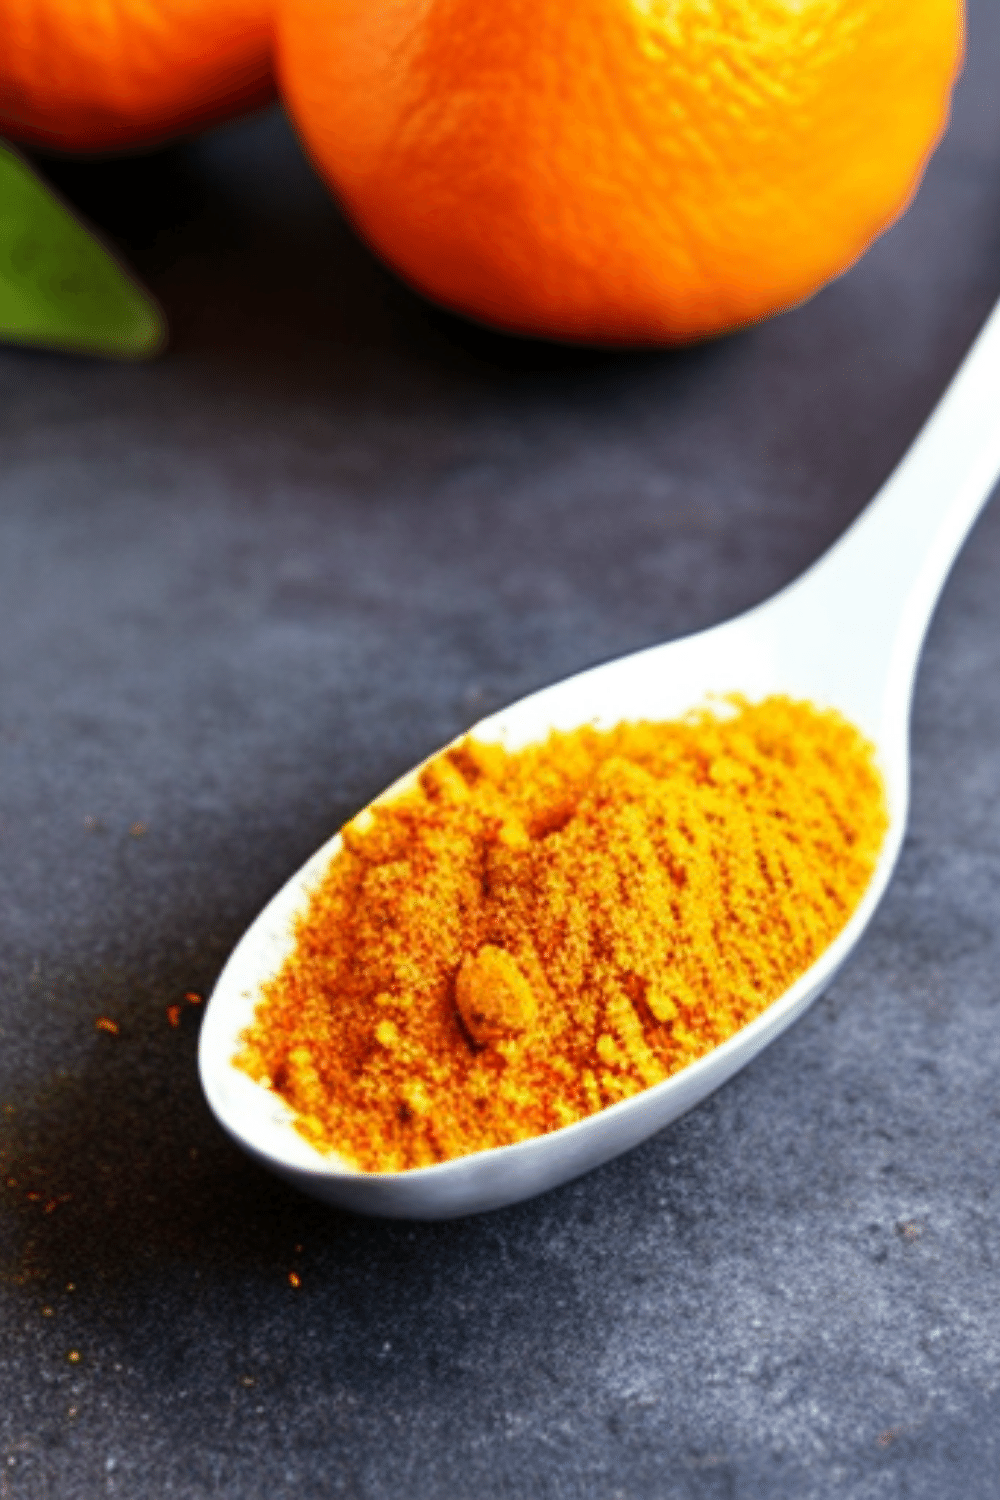 Spice Up Your Life With Orange Spice!